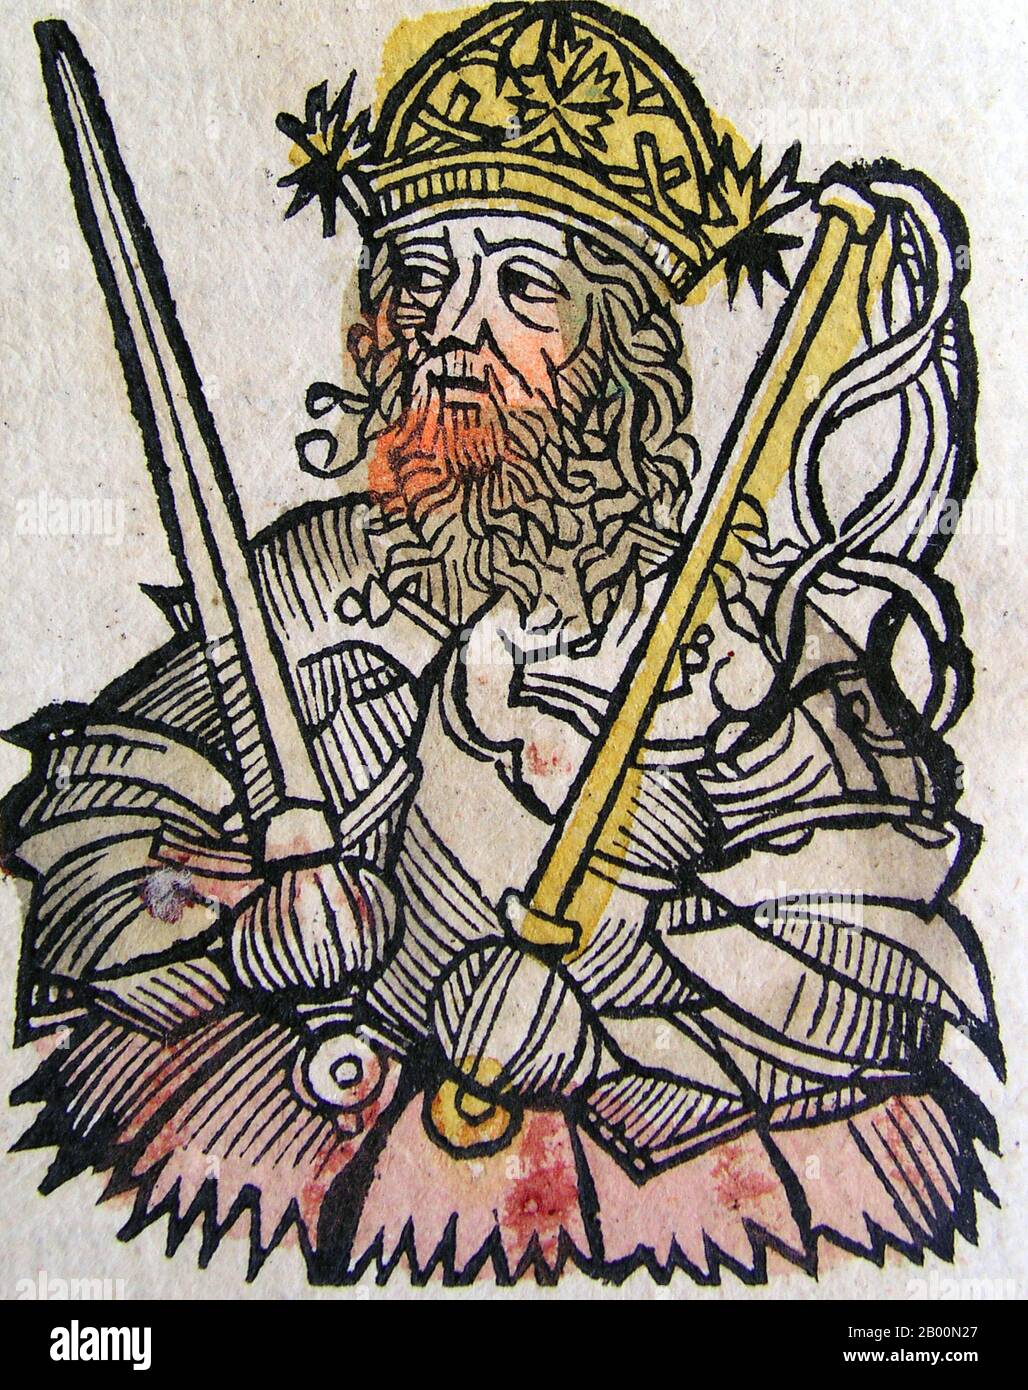 Germany: Attila, King of the Huns'. The Nuremberg Chronicle, by Hartmann Schedel (1440-1514), 1493.  The Nuremberg Chronicle is an illustrated world history. Its structure follows the story of human history as related in the Bible; it includes the histories of a number of important Western cities. Written in Latin by Hartmann Schedel, with a version in German translation by Georg Alt, it appeared in 1493. It is one of the best-documented early printed books. It is classified as an incunabulum, a book, pamphlet, or broadside that was printed (not handwritten) before the year 1501 in Europe. Stock Photo